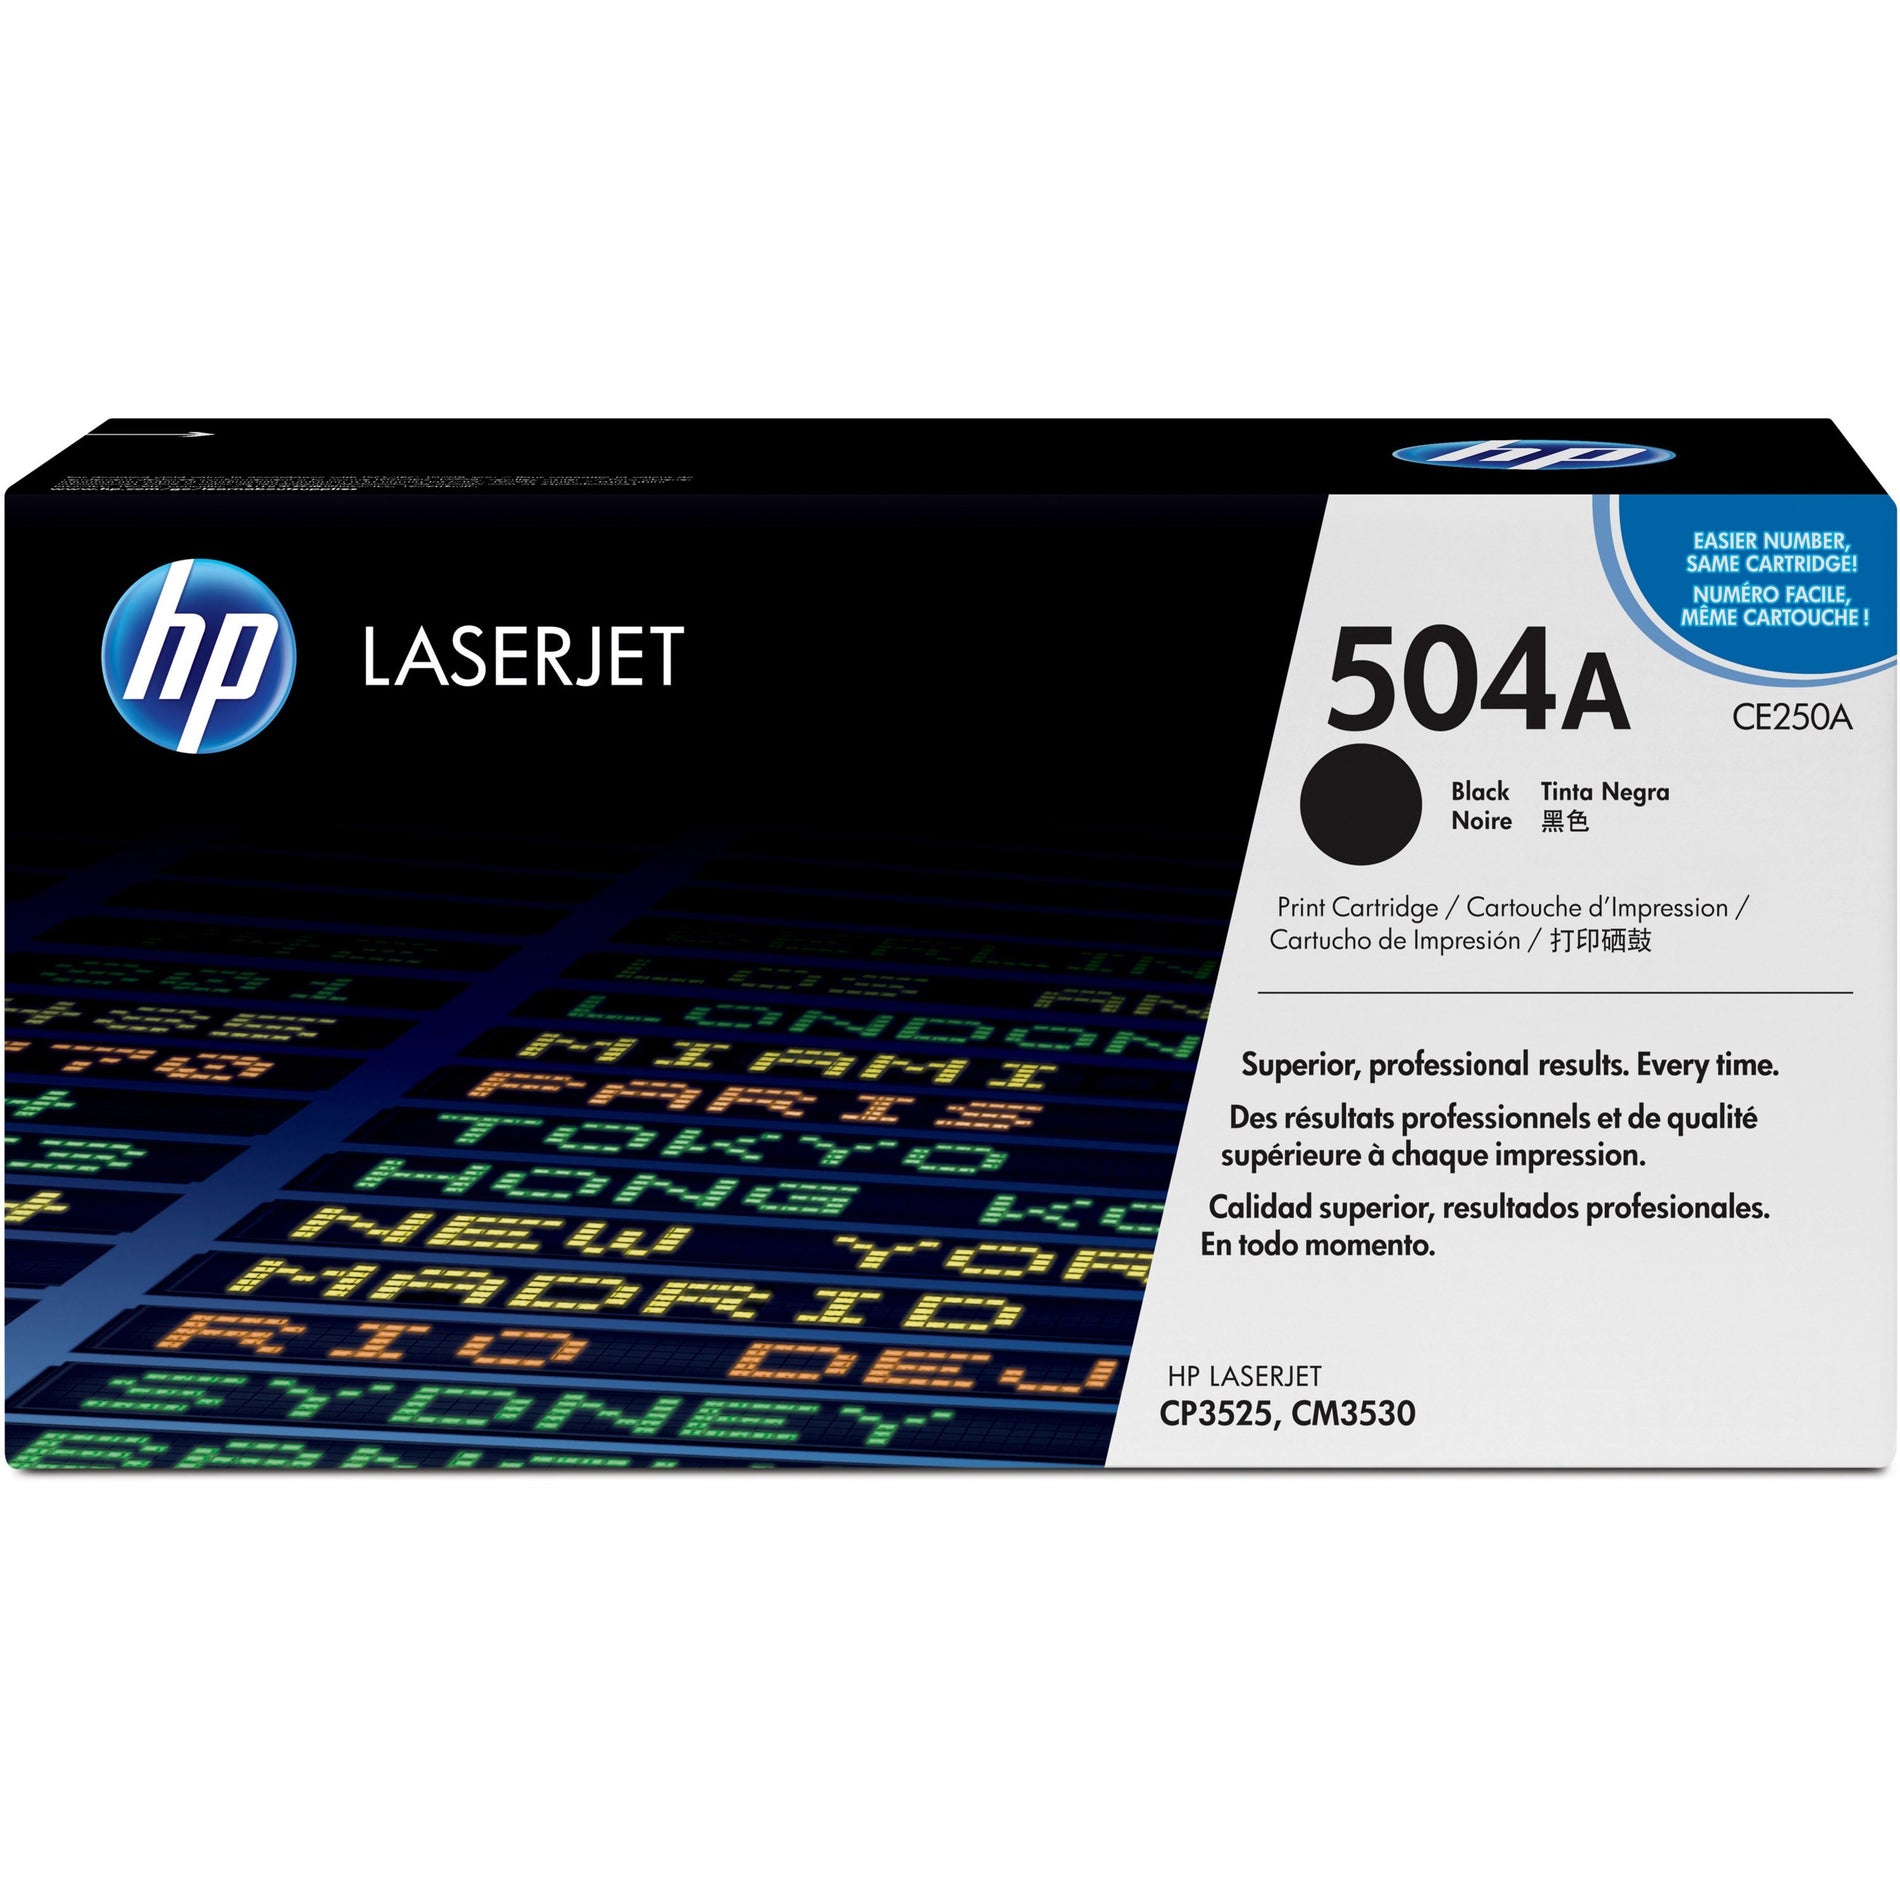 HP CE250A 504A Toner Cartridge, 5000 Page Yield, Black